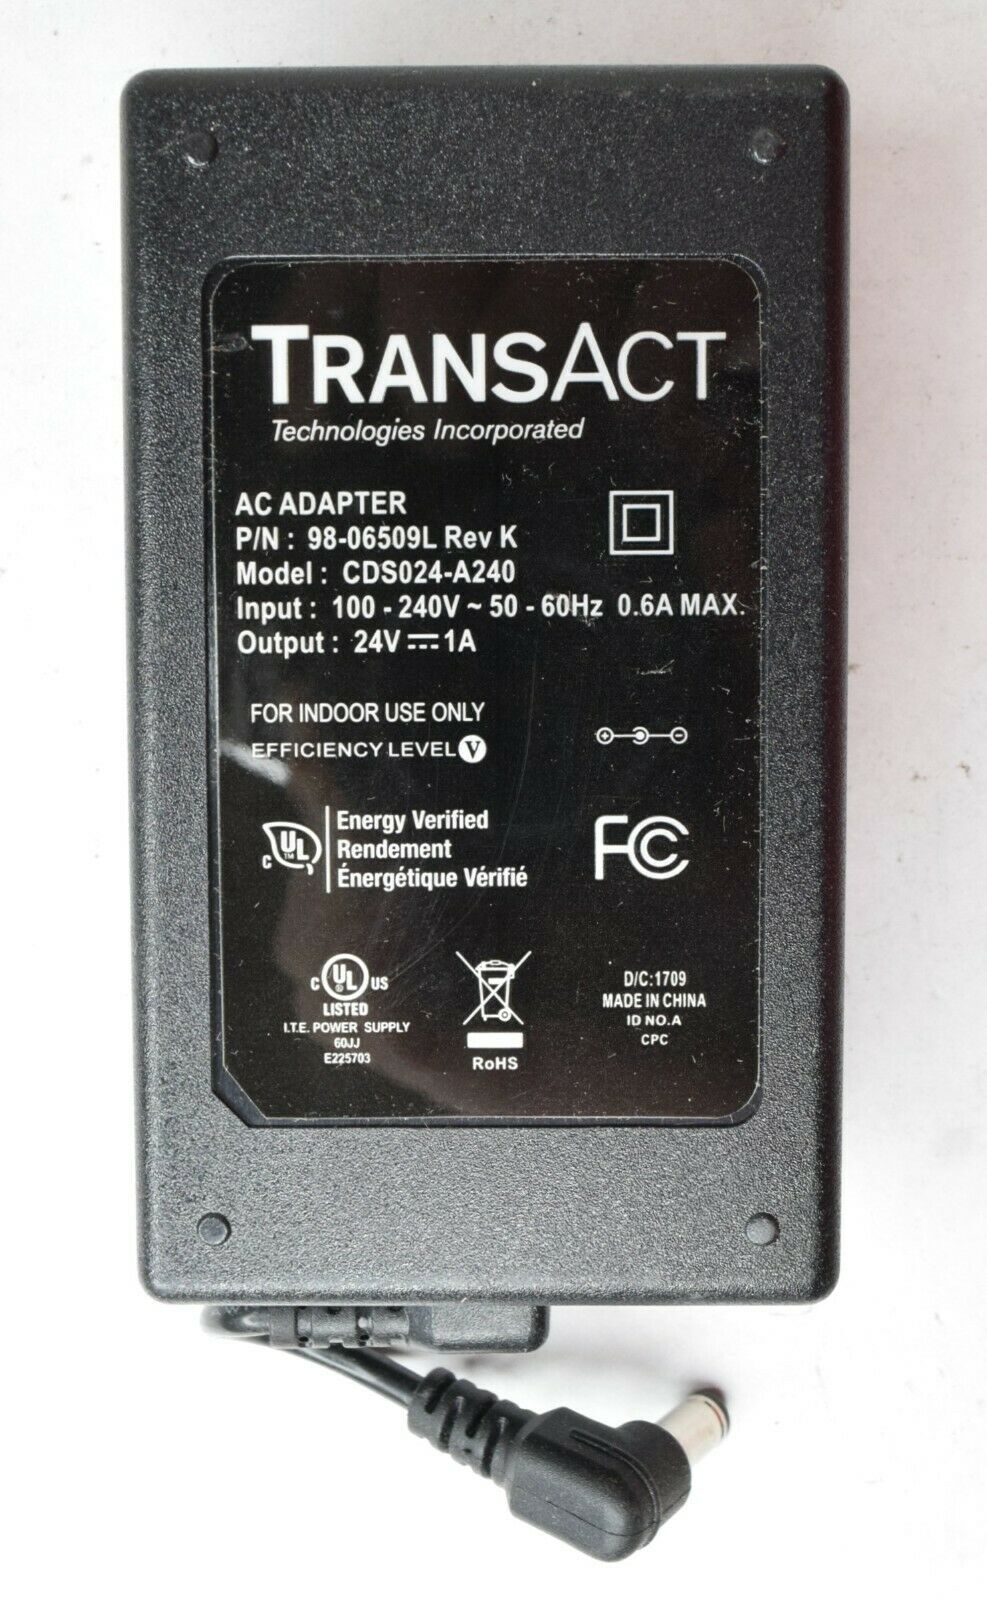 TransAct AC Adapter Power Supply Unit 98-06509L CDS024-A240 24V 1A tip:5.5*2.5mm Type: Adapter MPN: 98-06509L, CDS02 - Click Image to Close